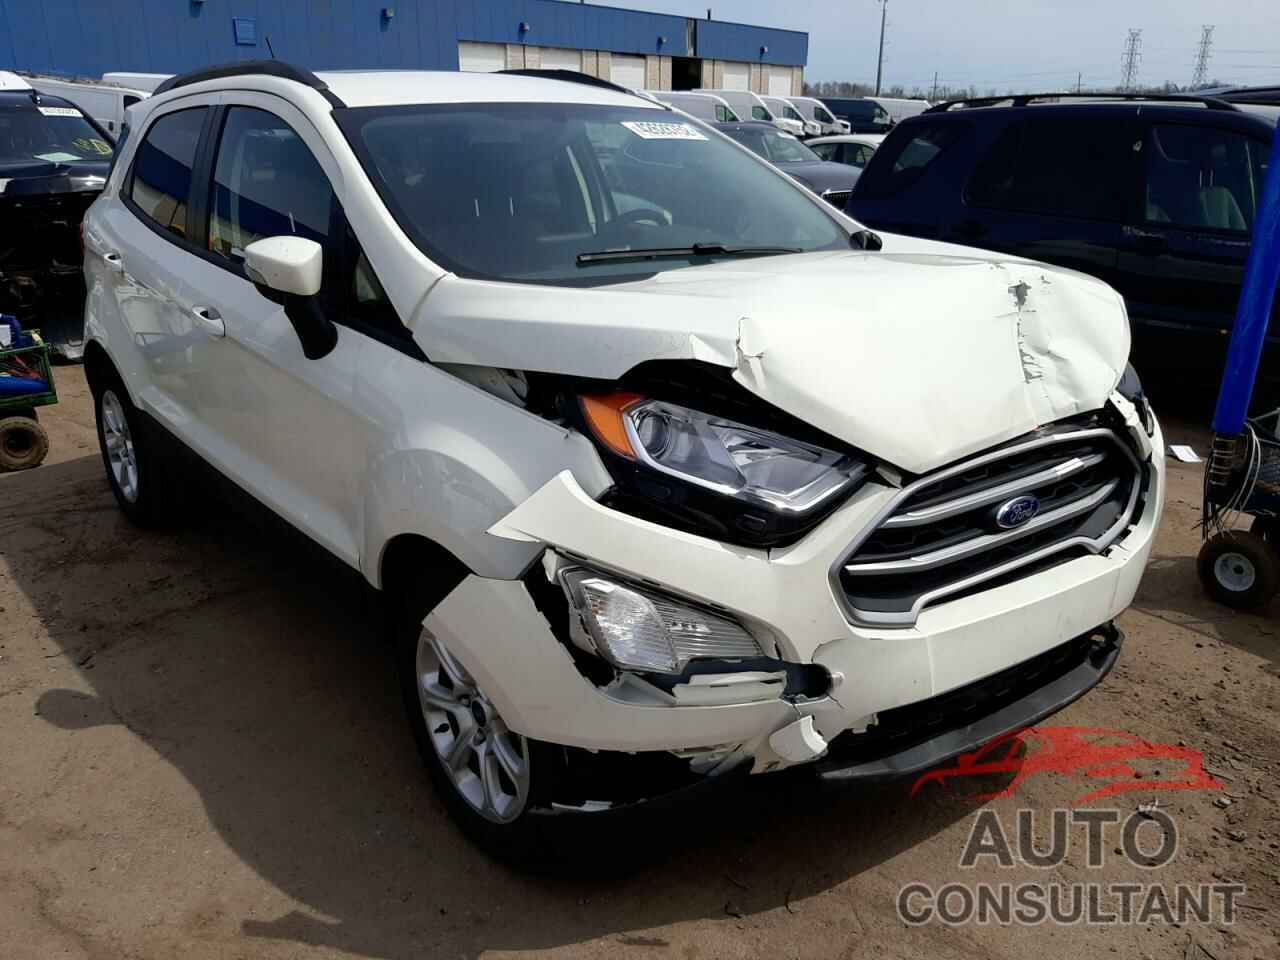 FORD ALL OTHER 2021 - MAJ3S2GE2MC424939